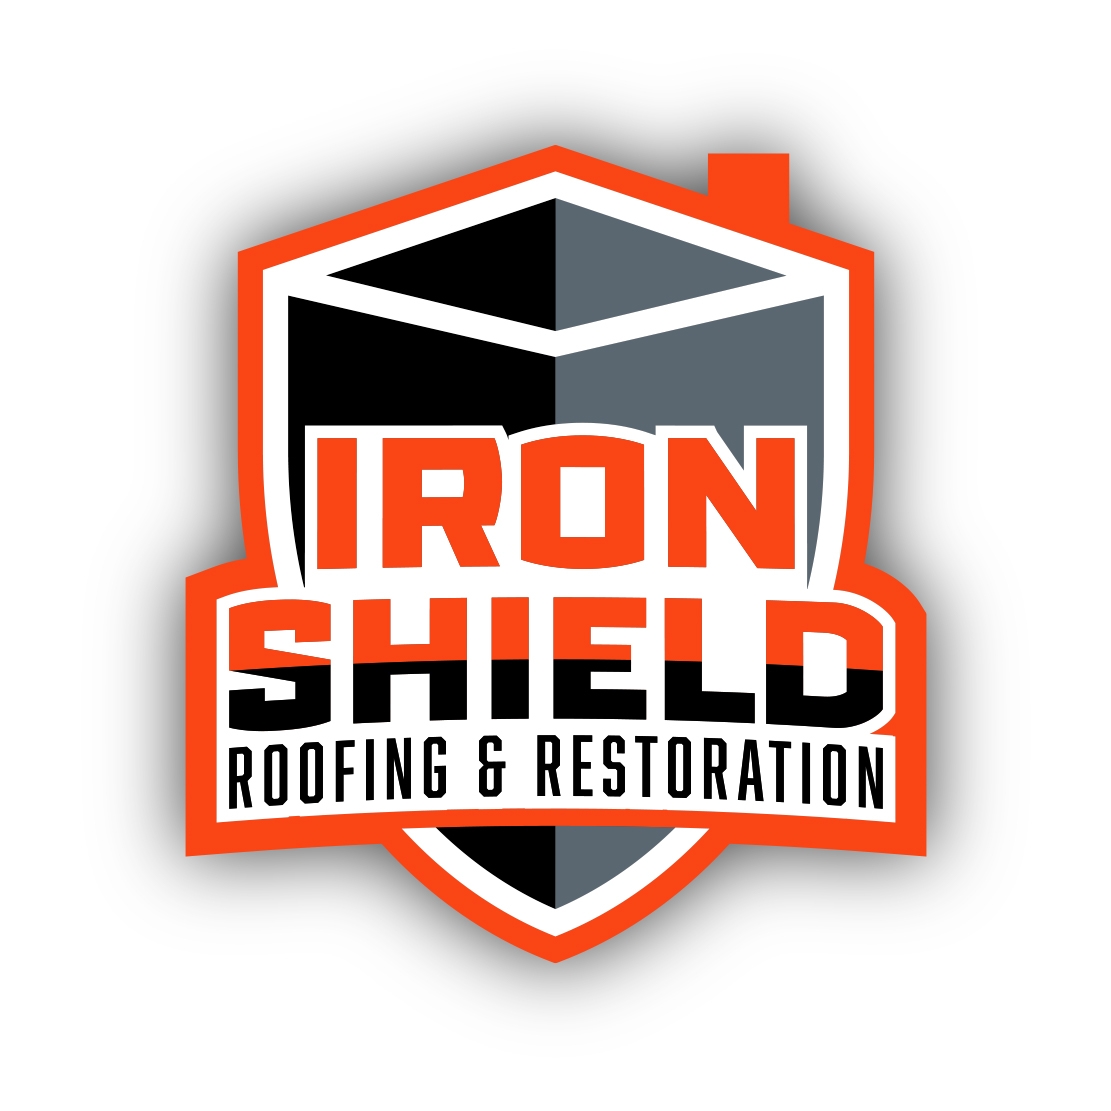 Iron Shield Roofing and Restoration